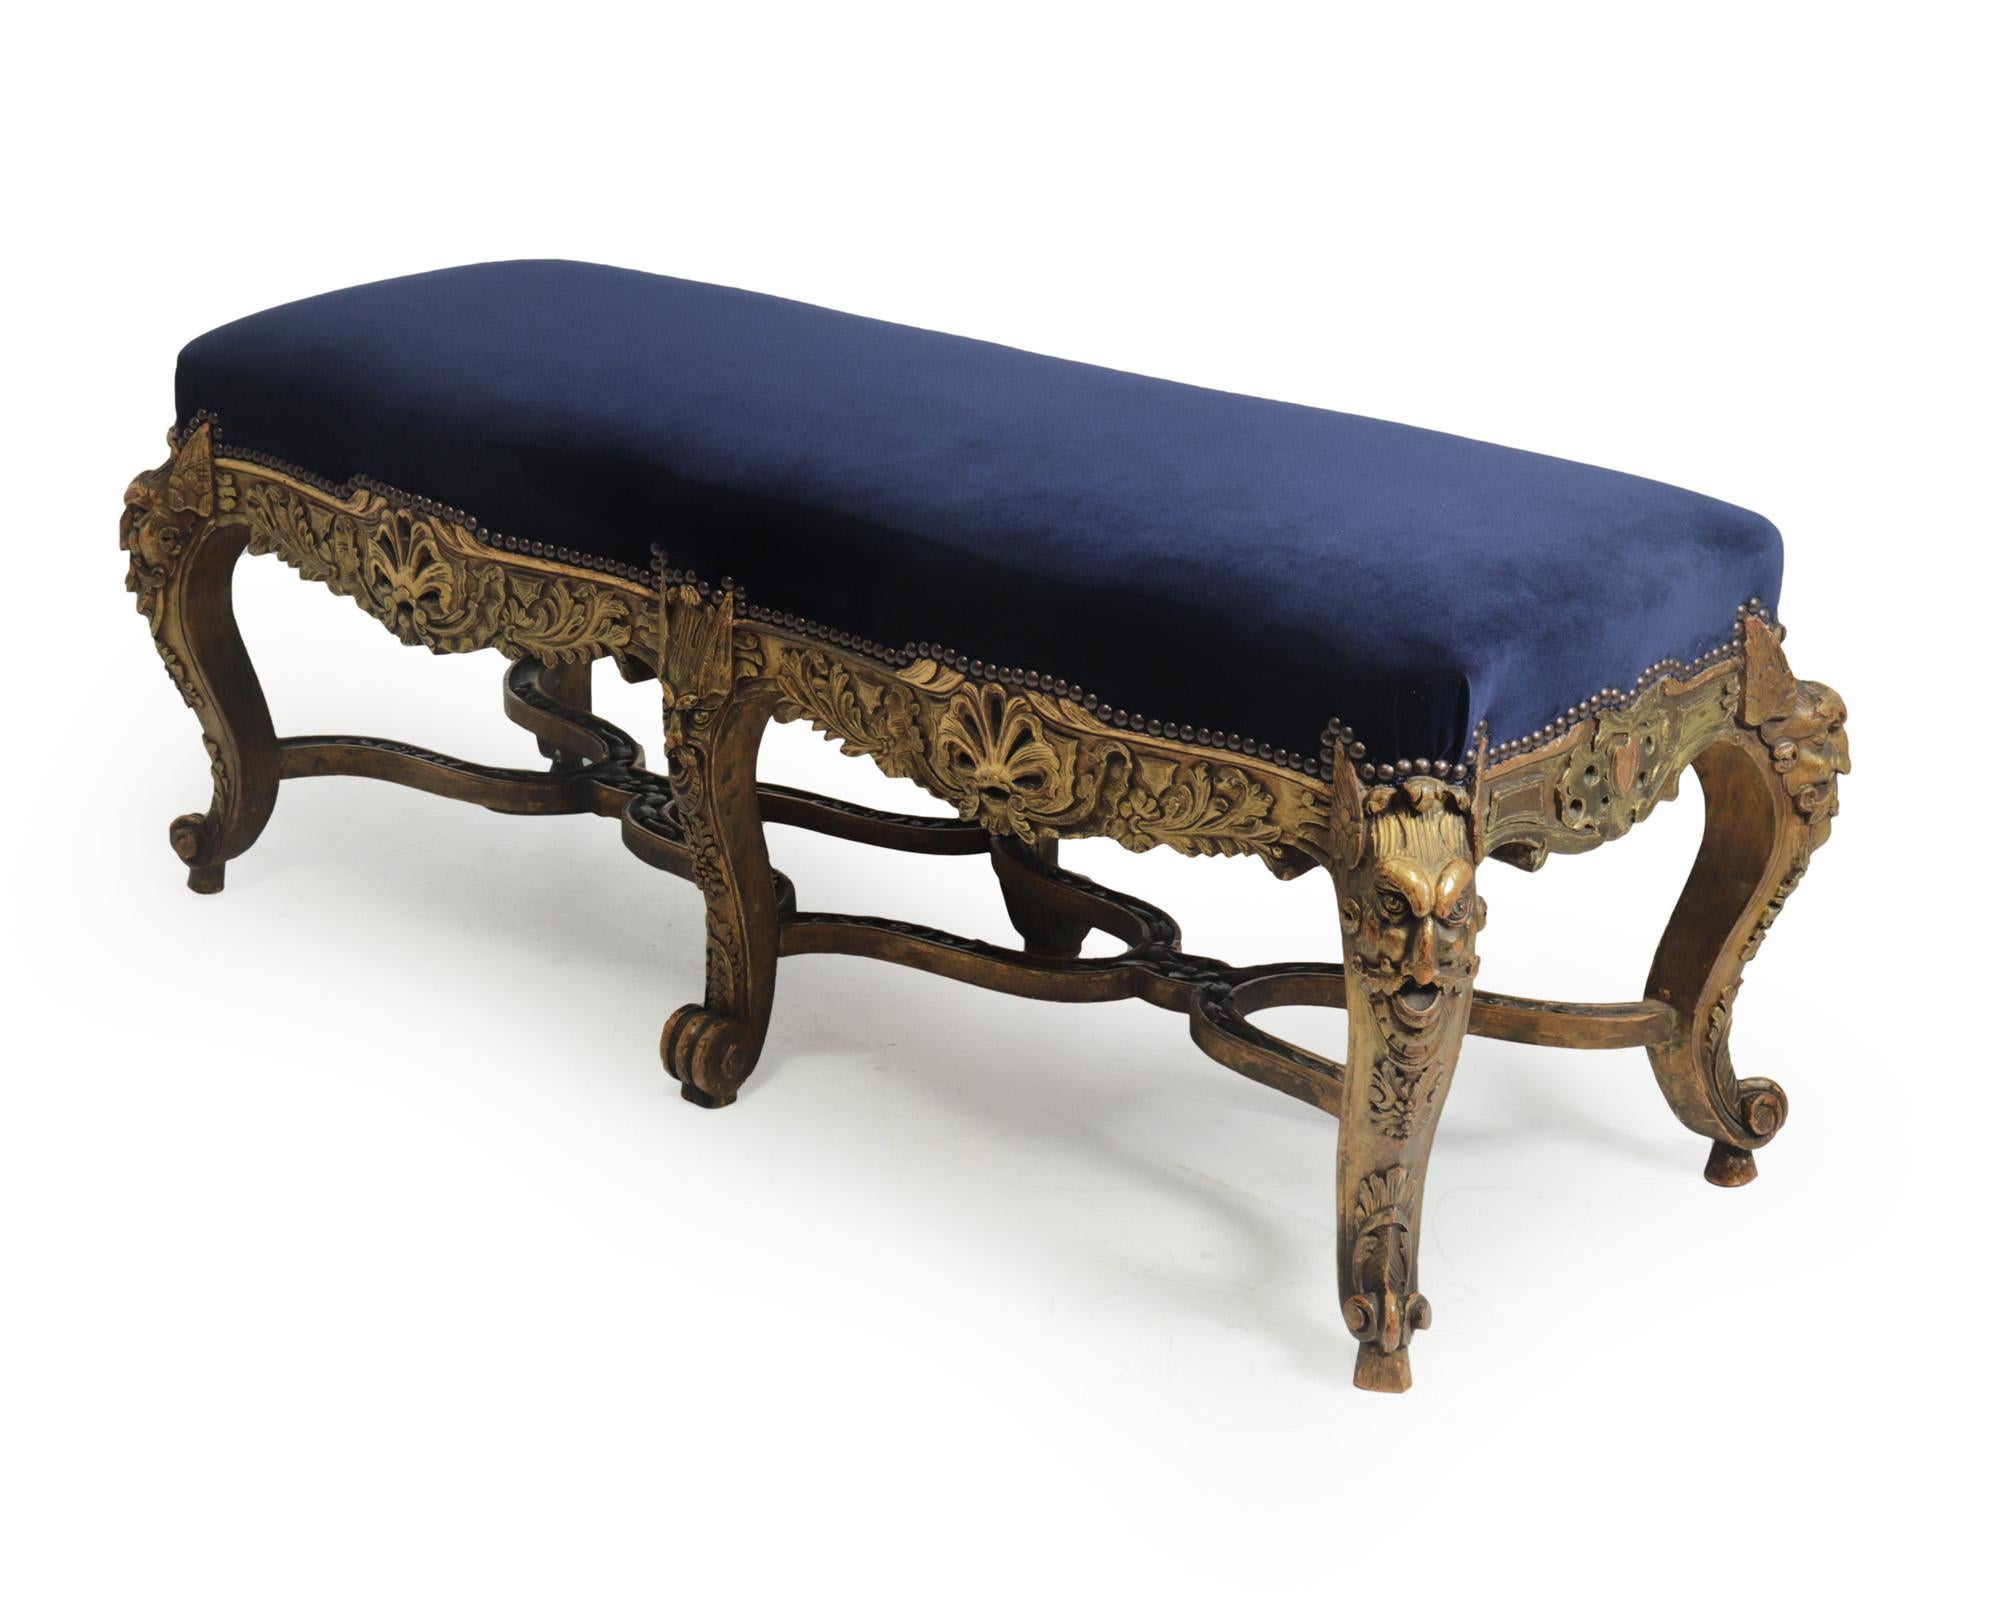 Antique French carved and parcel gilt long stool, c1860
Elegant and fine French baroque style ornately carved gilt wood stool, serpentine in form. It features cabriole legs on scroll feet decorated with scrolls and acanthus leaves, six grotesque